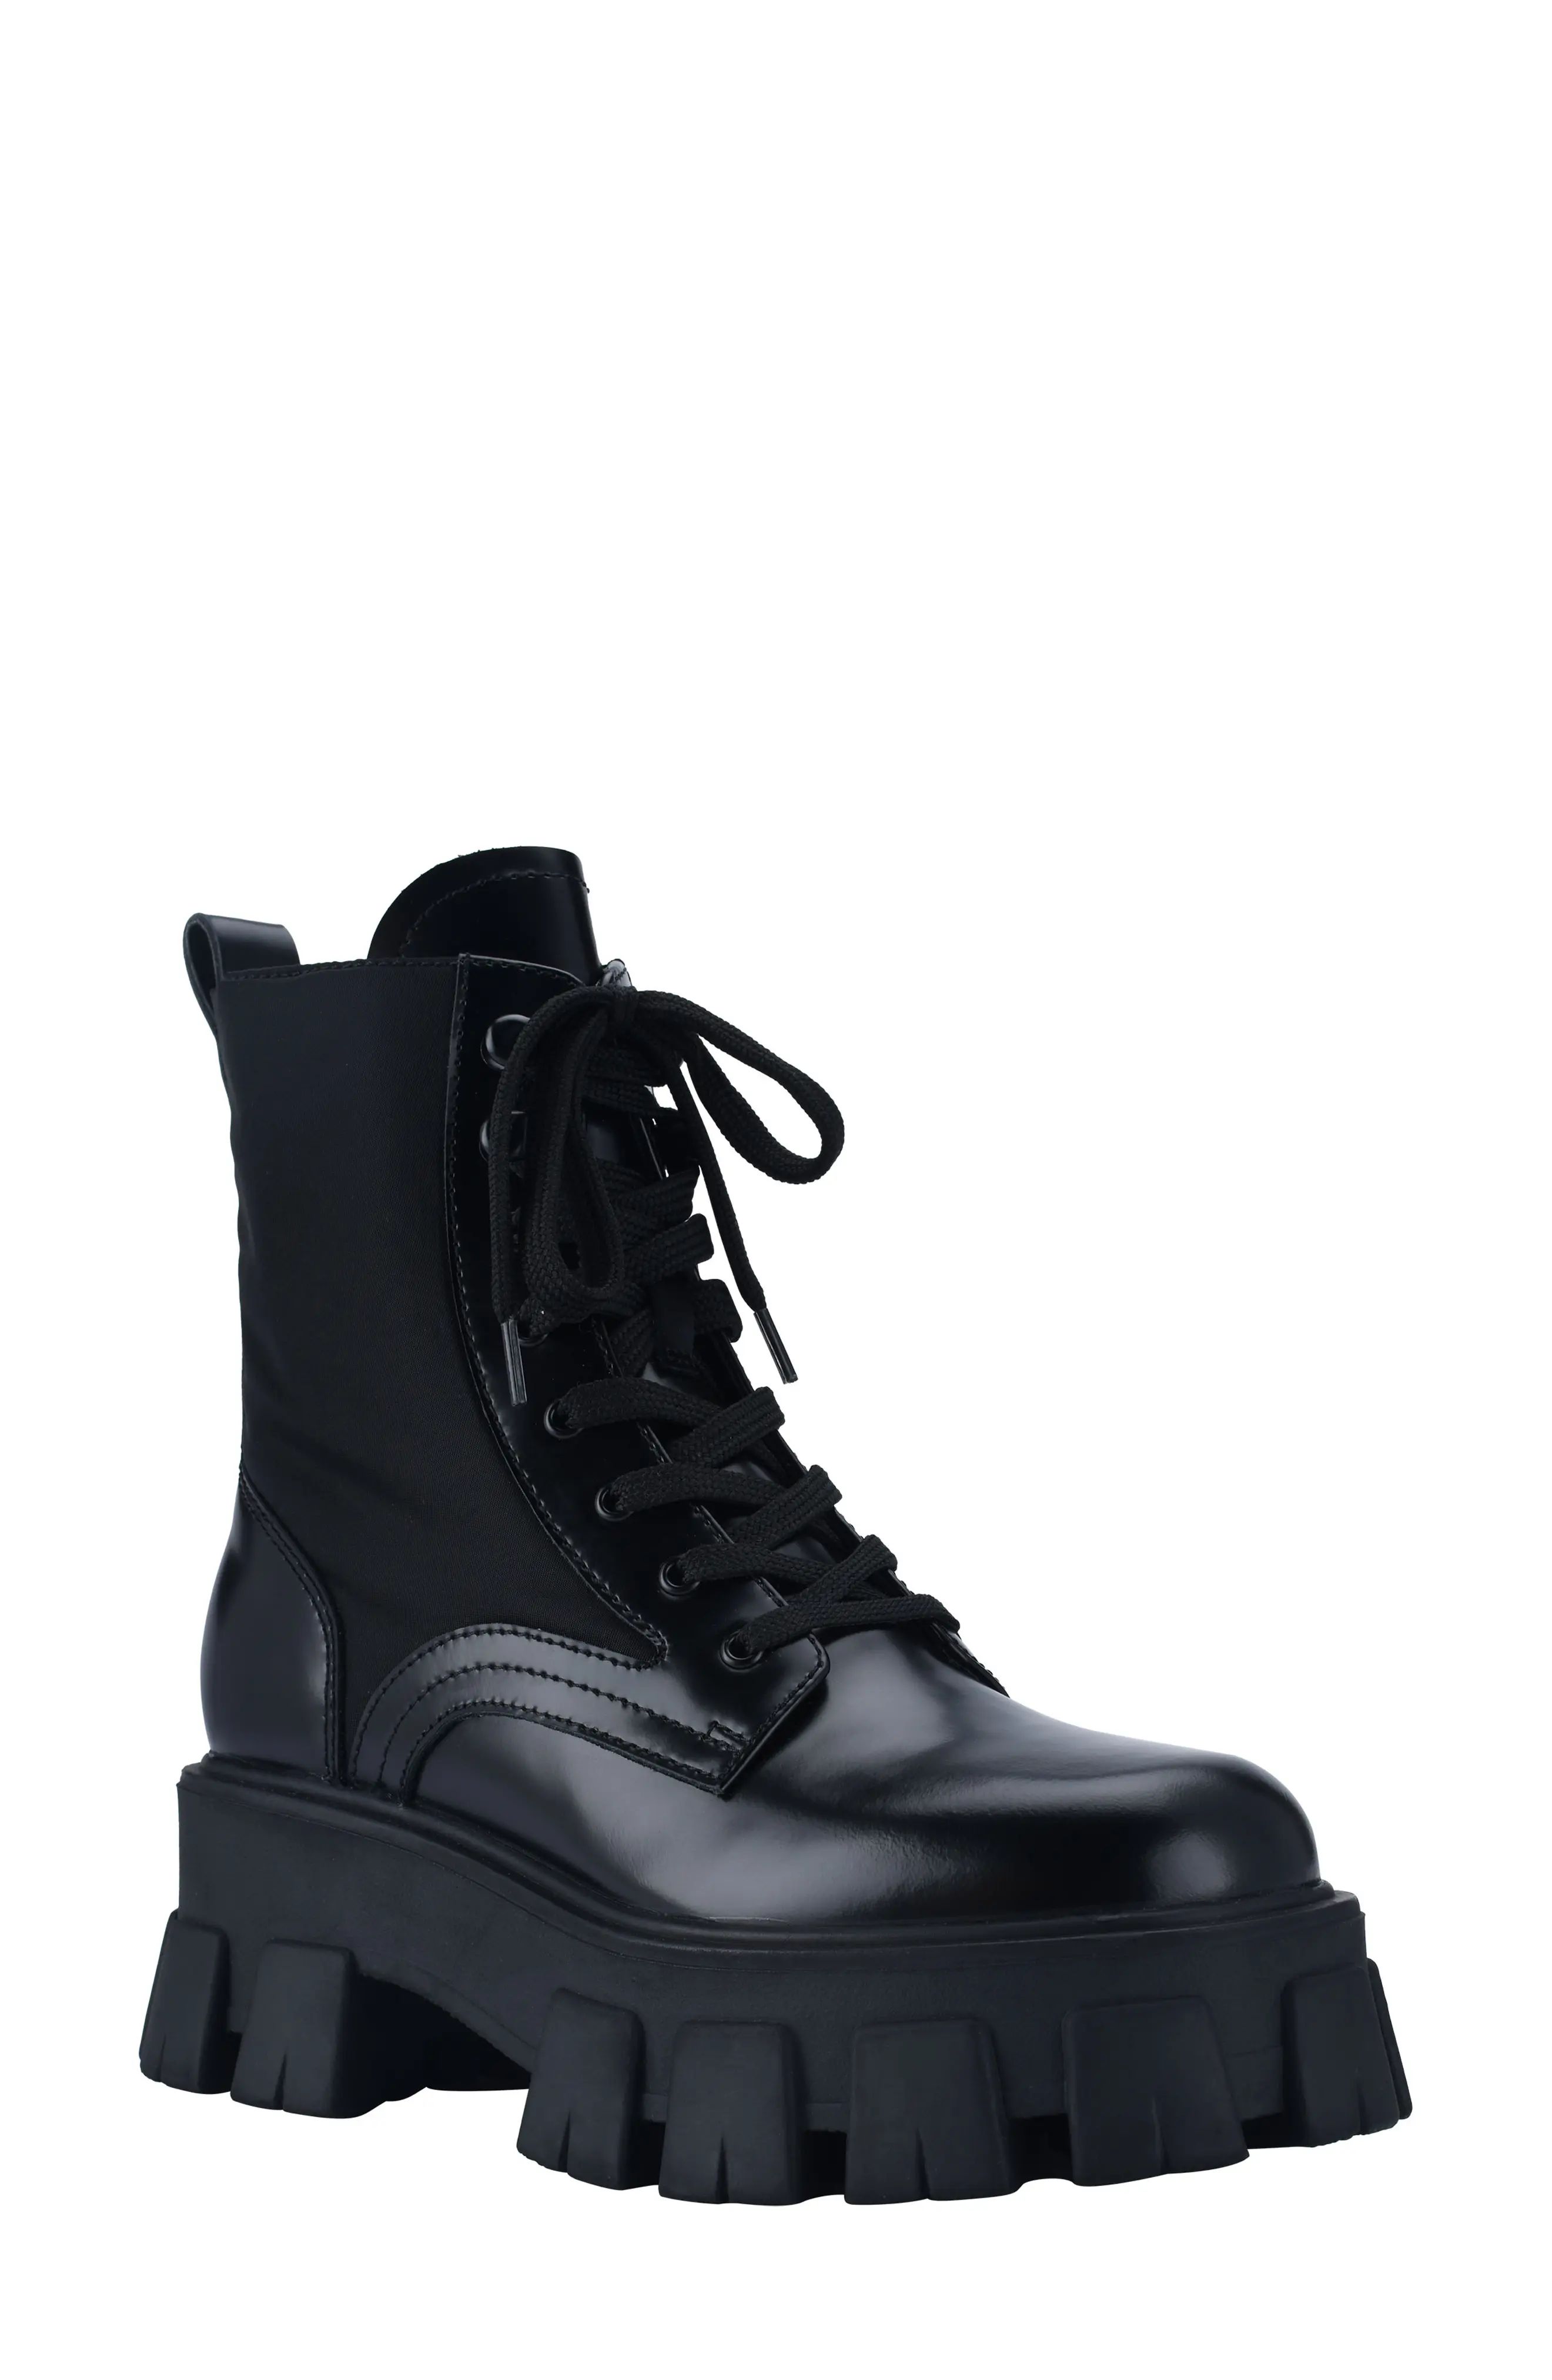 Marc Fisher LTD Happy Combat Boot in Black Leather at Nordstrom, Size 6 | Nordstrom